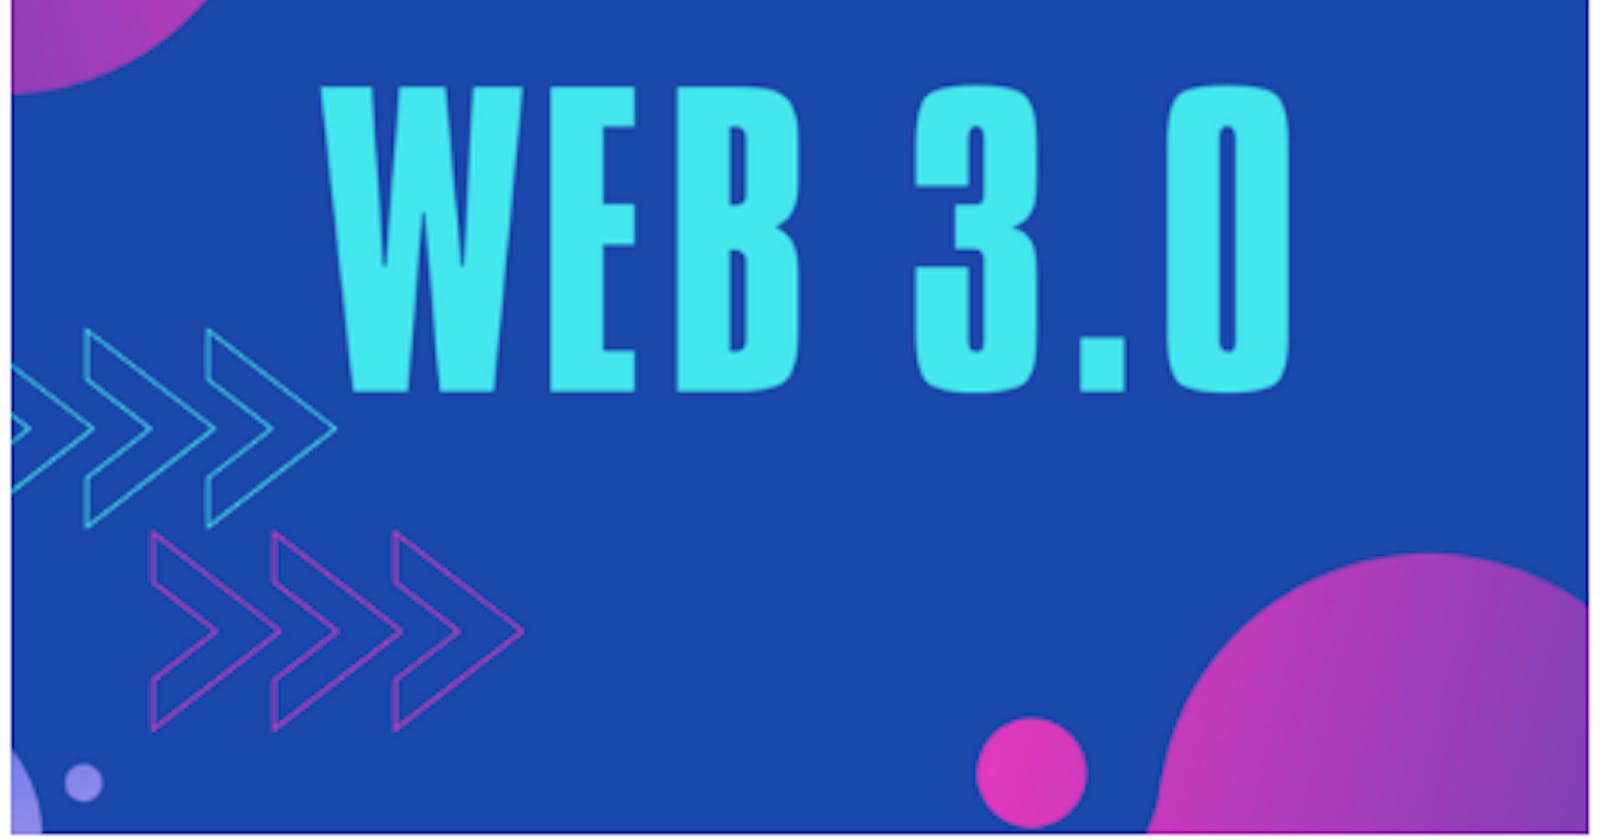 What Is Web3 (Web 3.0) And How Can One Invest in It?